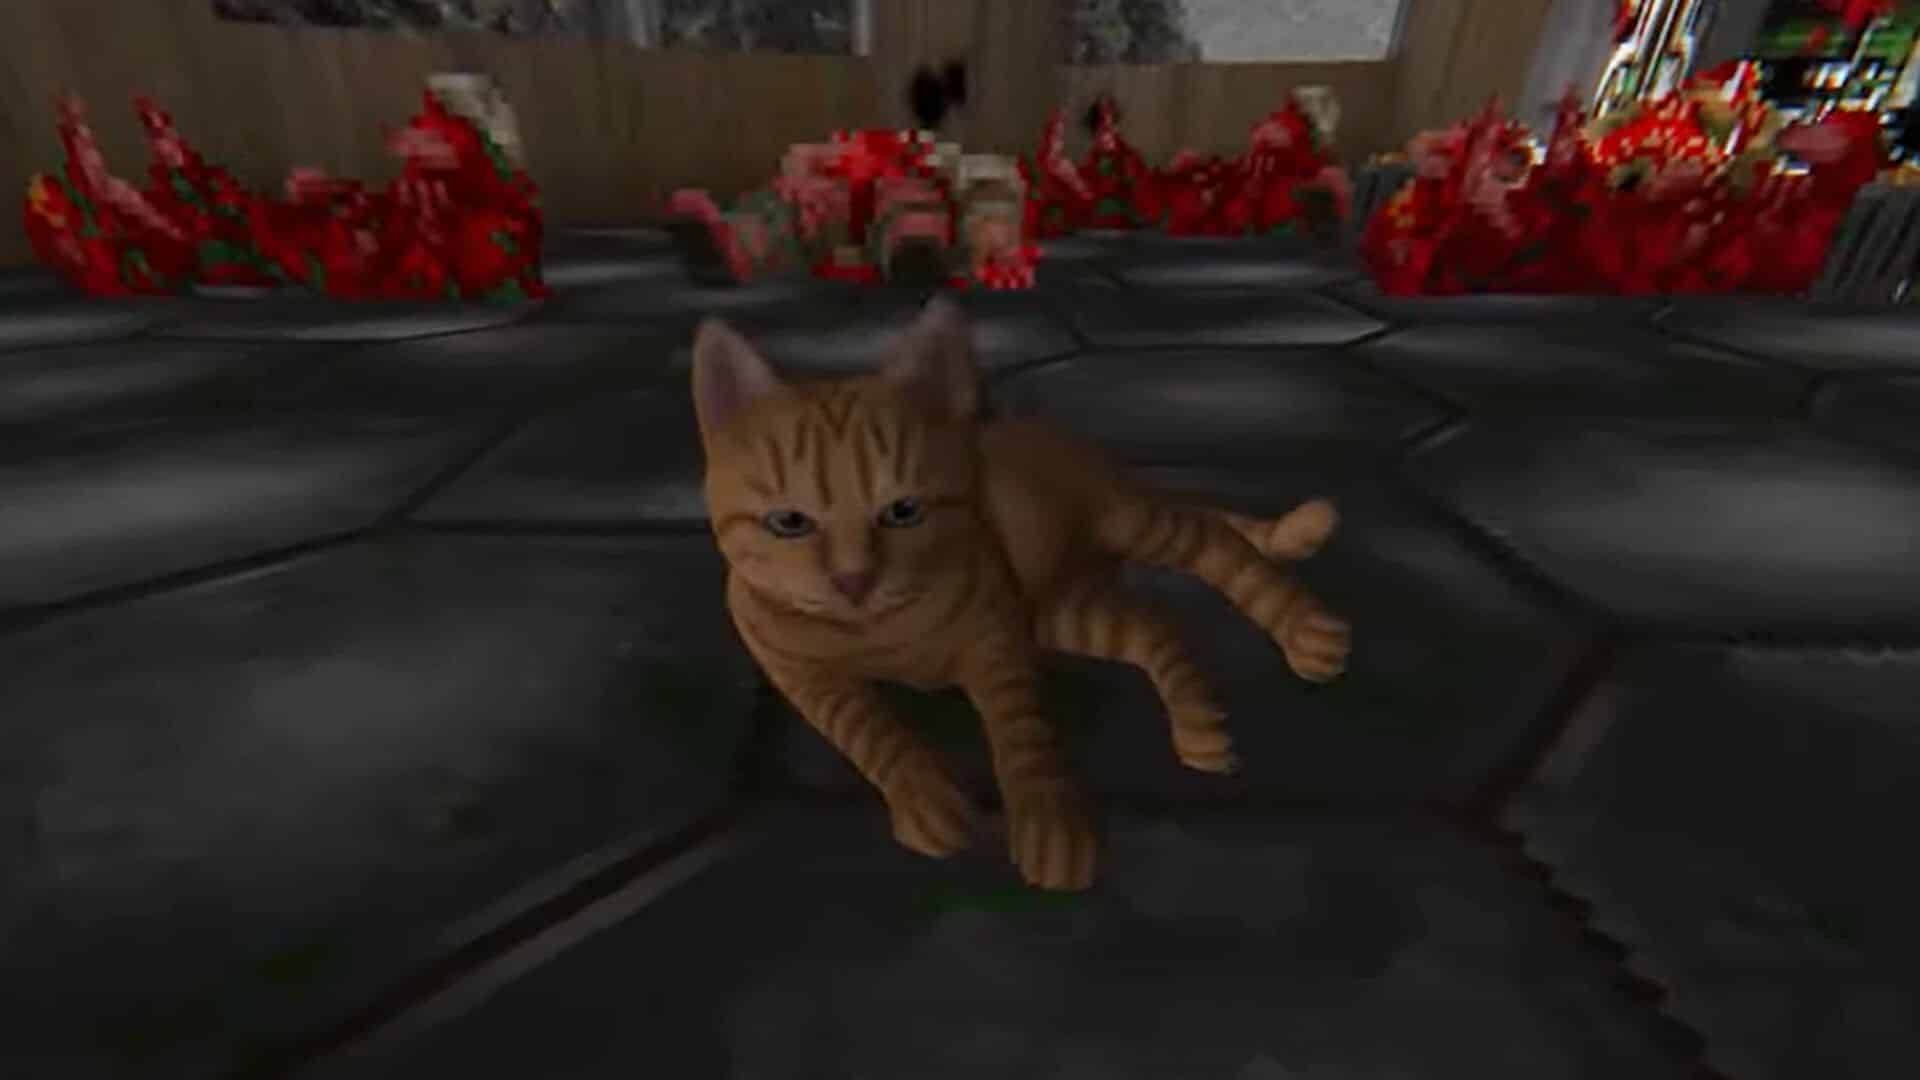 Stray's cat has now been modded into Doom